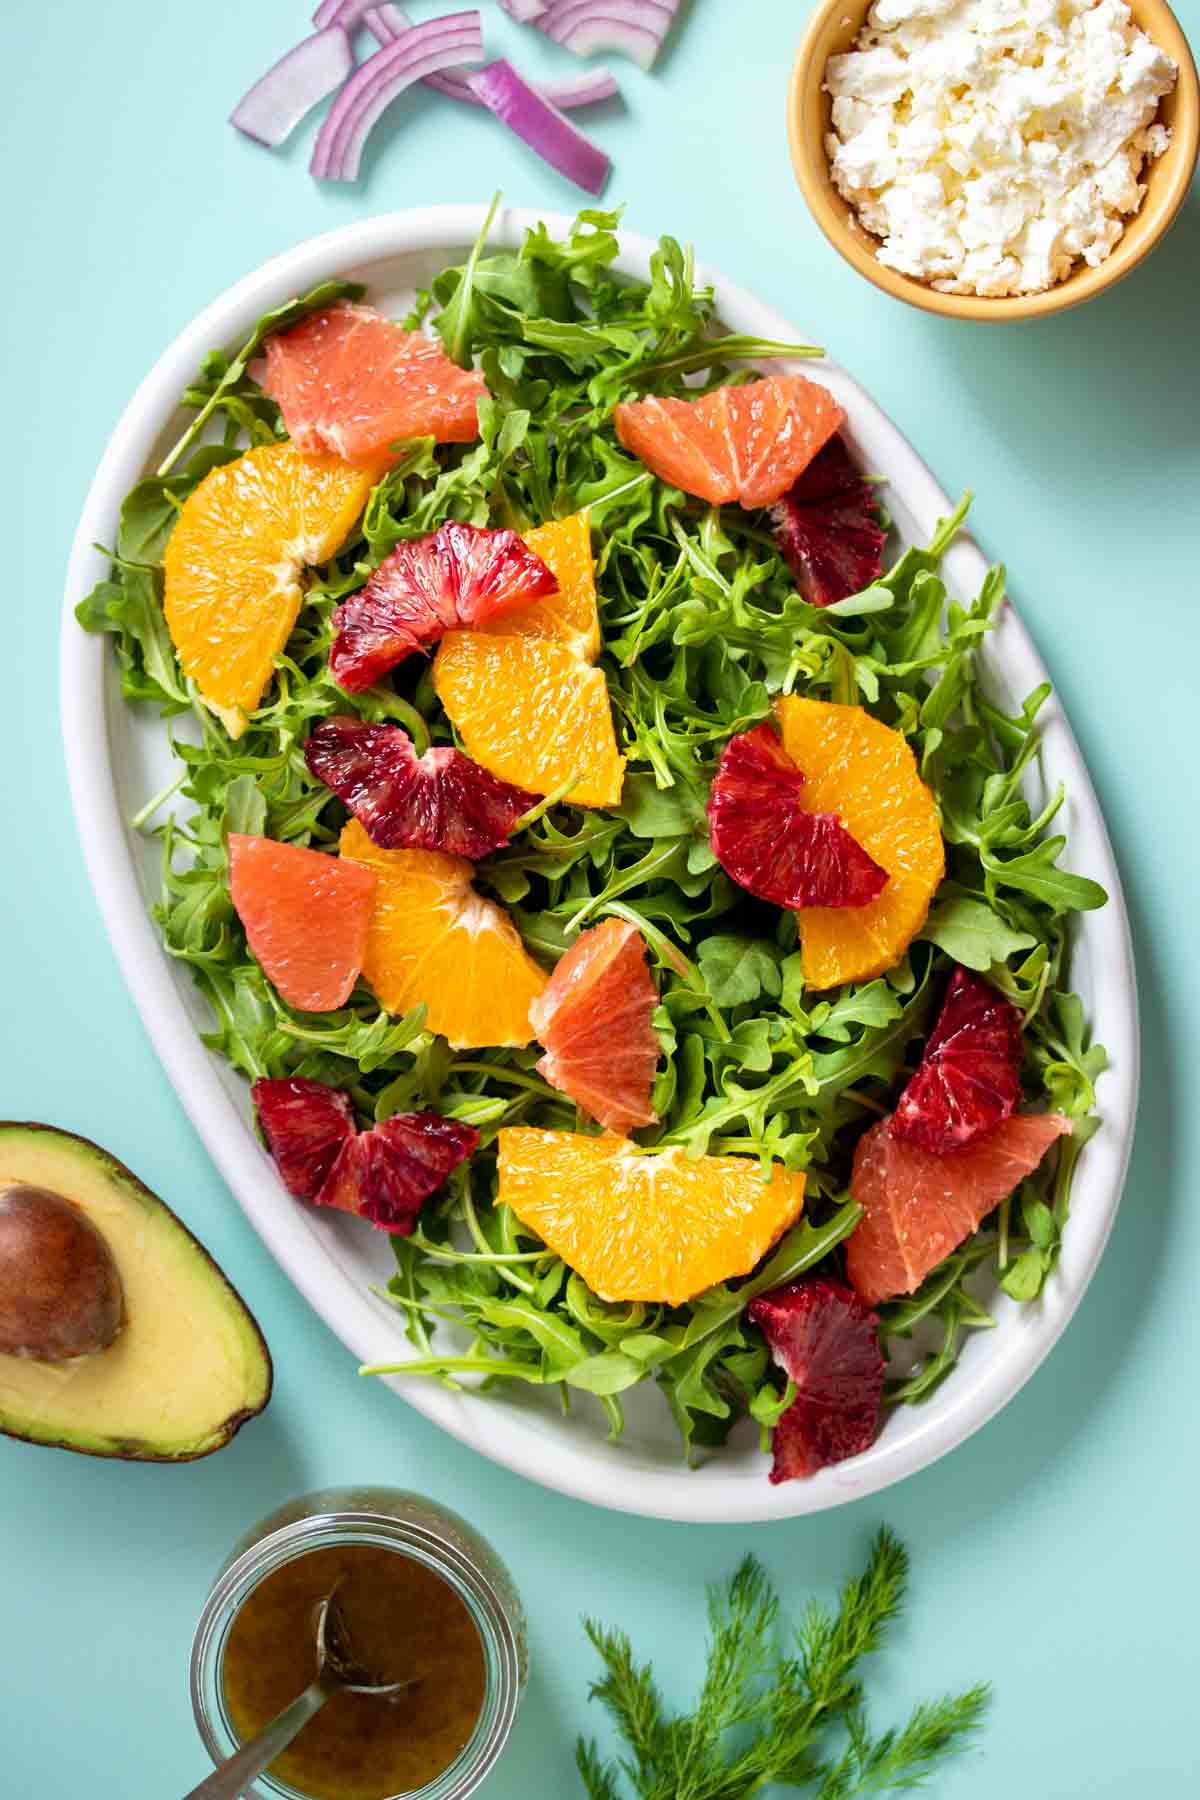 A salad with citrus pieces on a white platter with salad ingredients around it on a turquoise background.